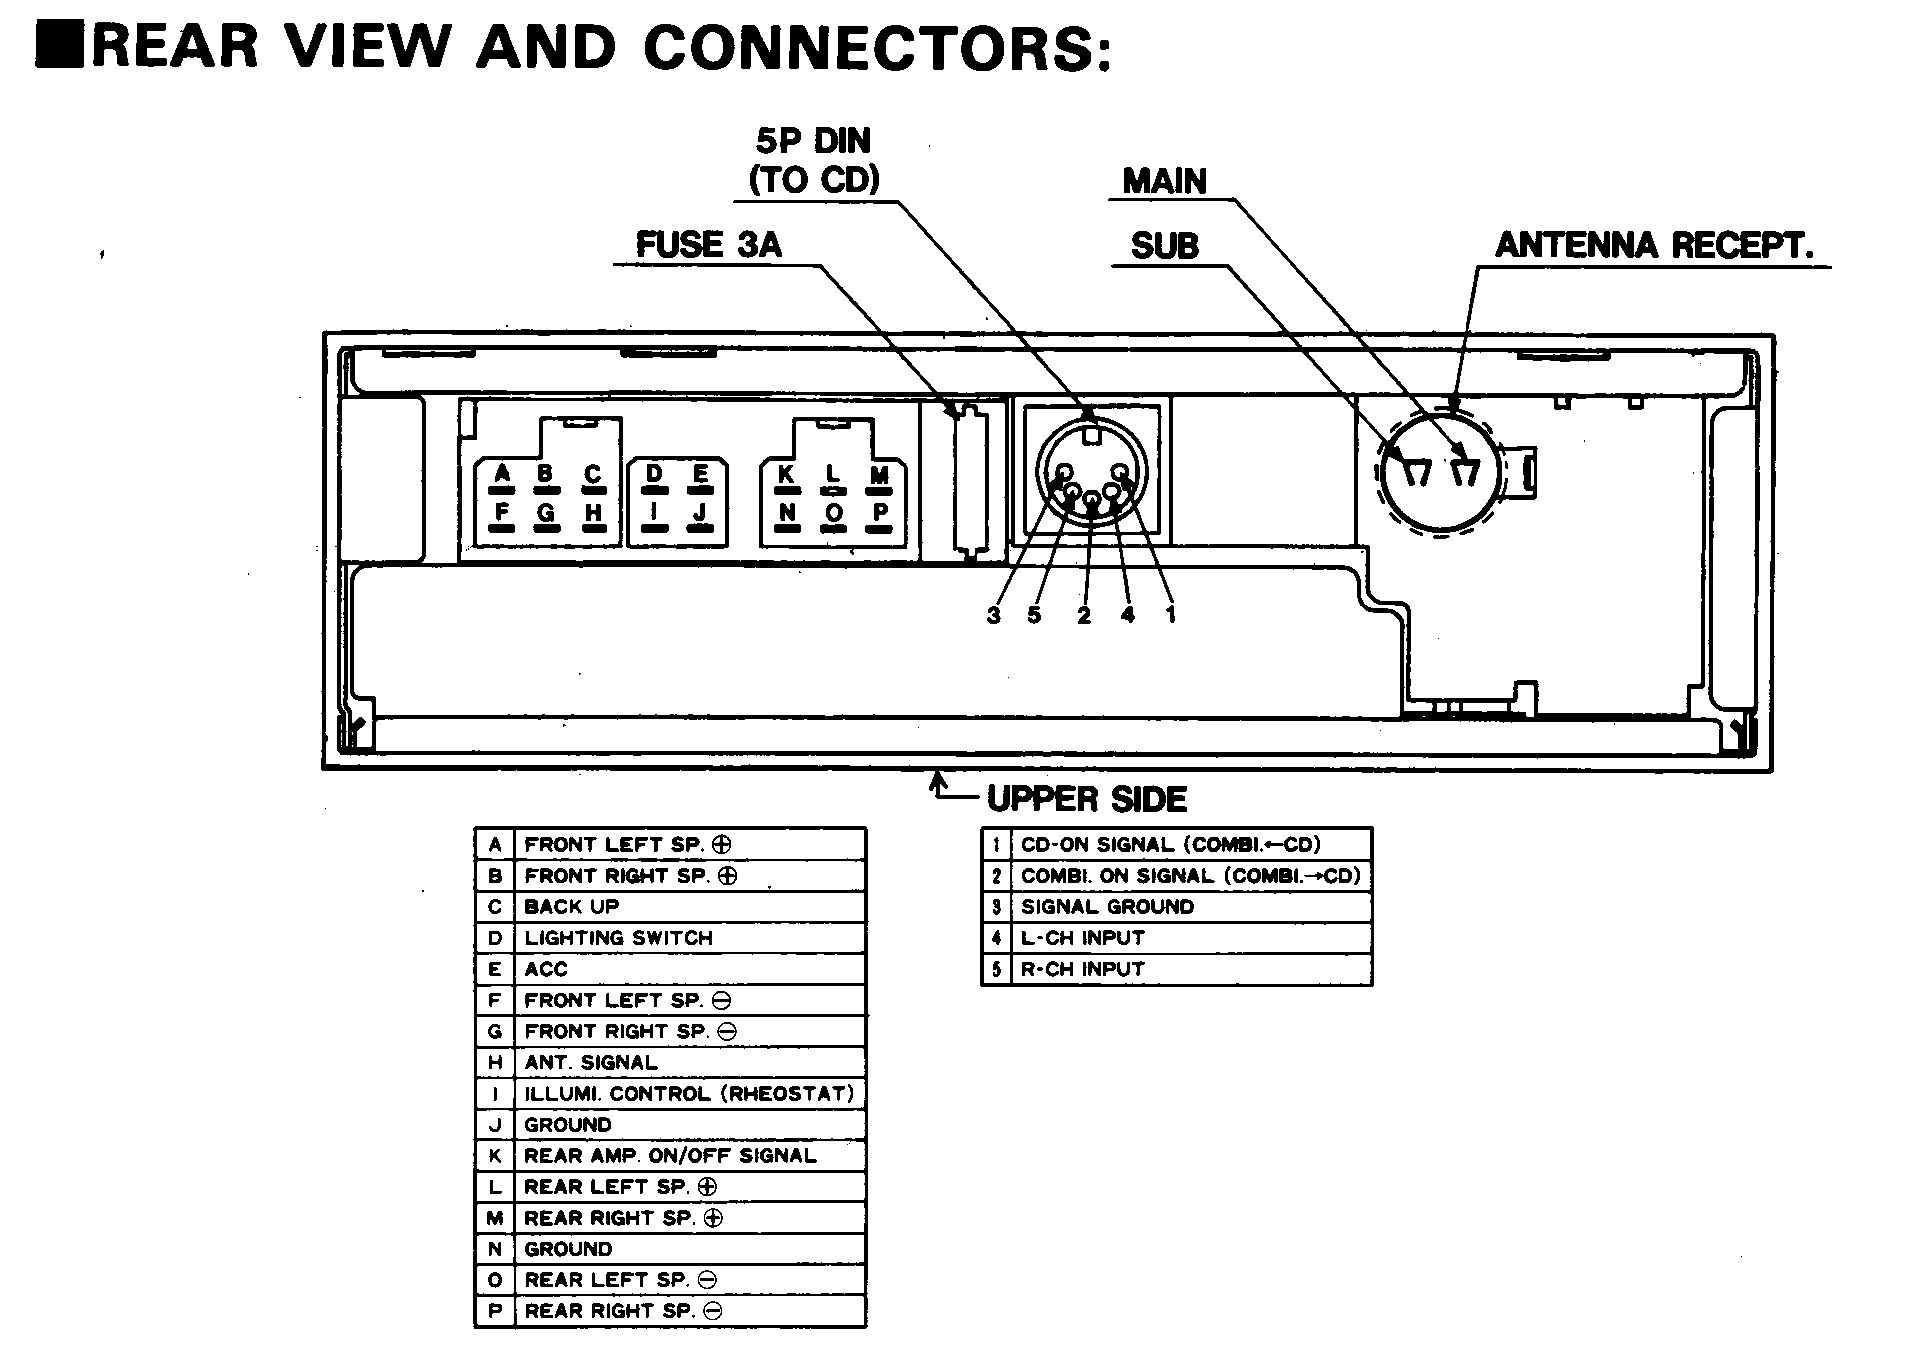 Car Stereo Amplifier Wiring Diagram from www.carstereohelp.net